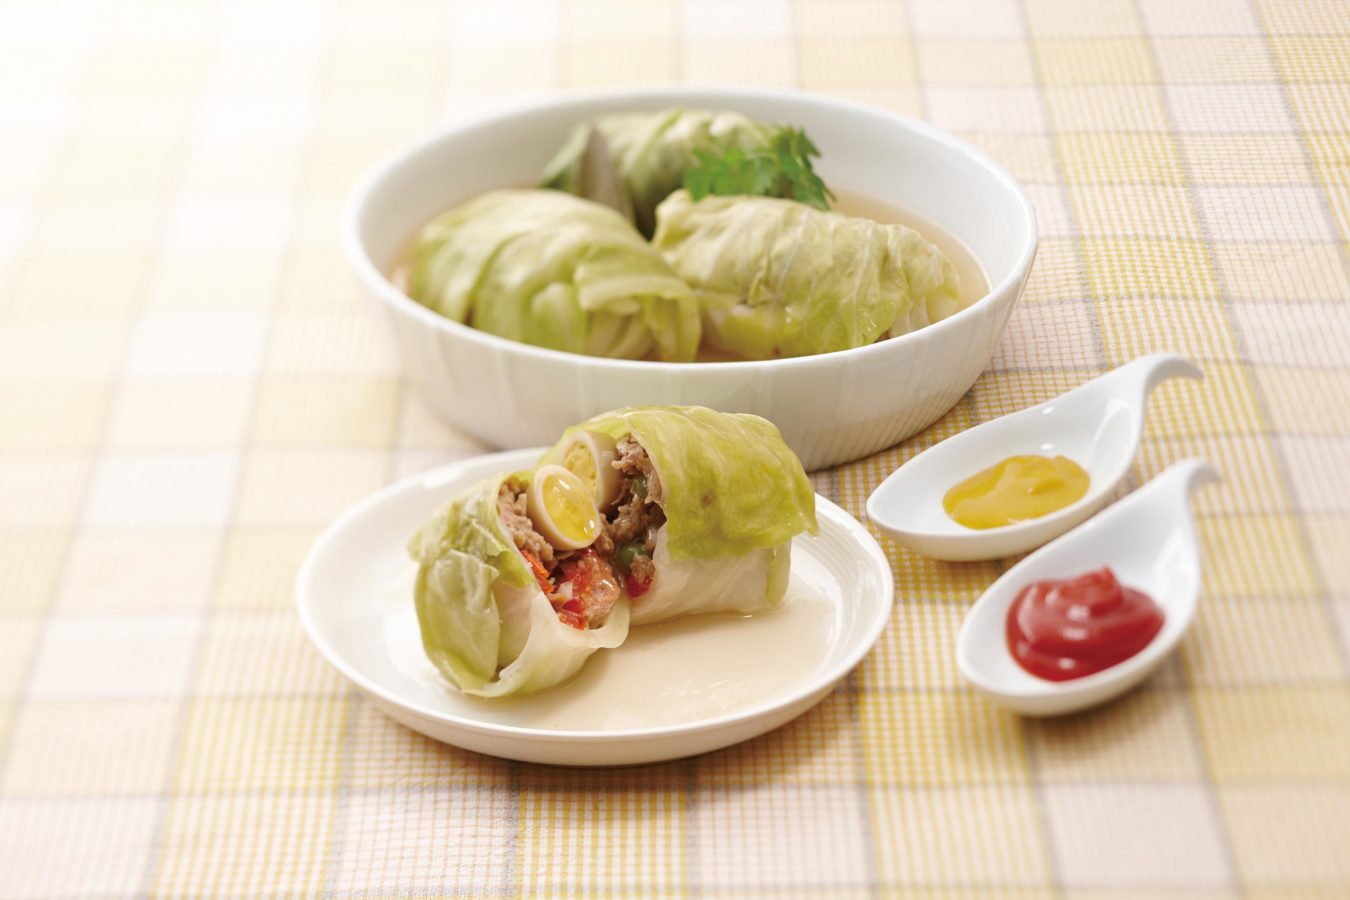 Stuffed Cabbage Rolls - These cabbage rolls make for an easy weeknight dinner that's kid friendly, healthy and filling! #cabbagerolls #healthyrecipes #ricecooker #tigerricecooker | Tiger USA